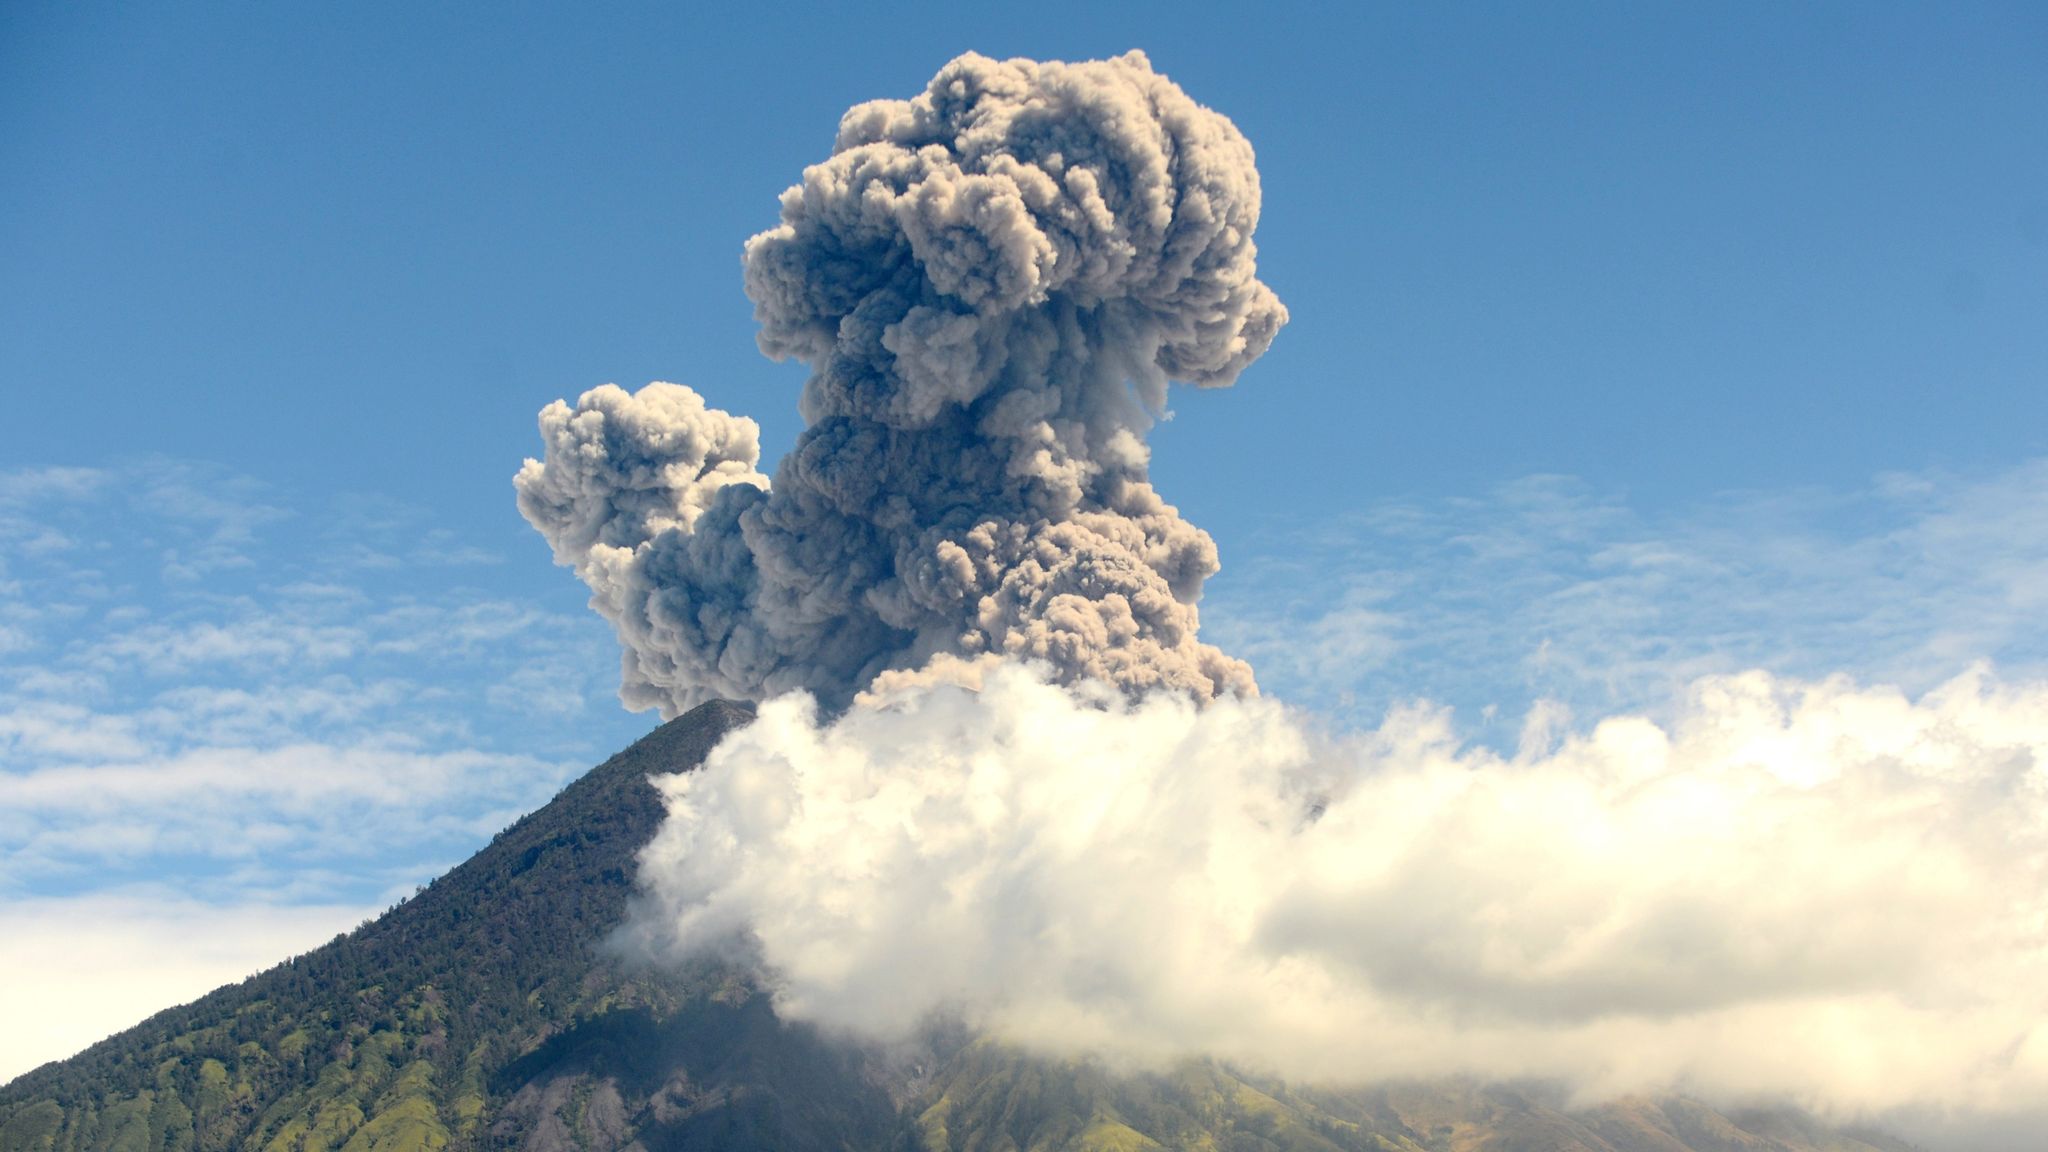 Volcanic eruption 'helped defeat Napoleon', study claims. Science & Tech News